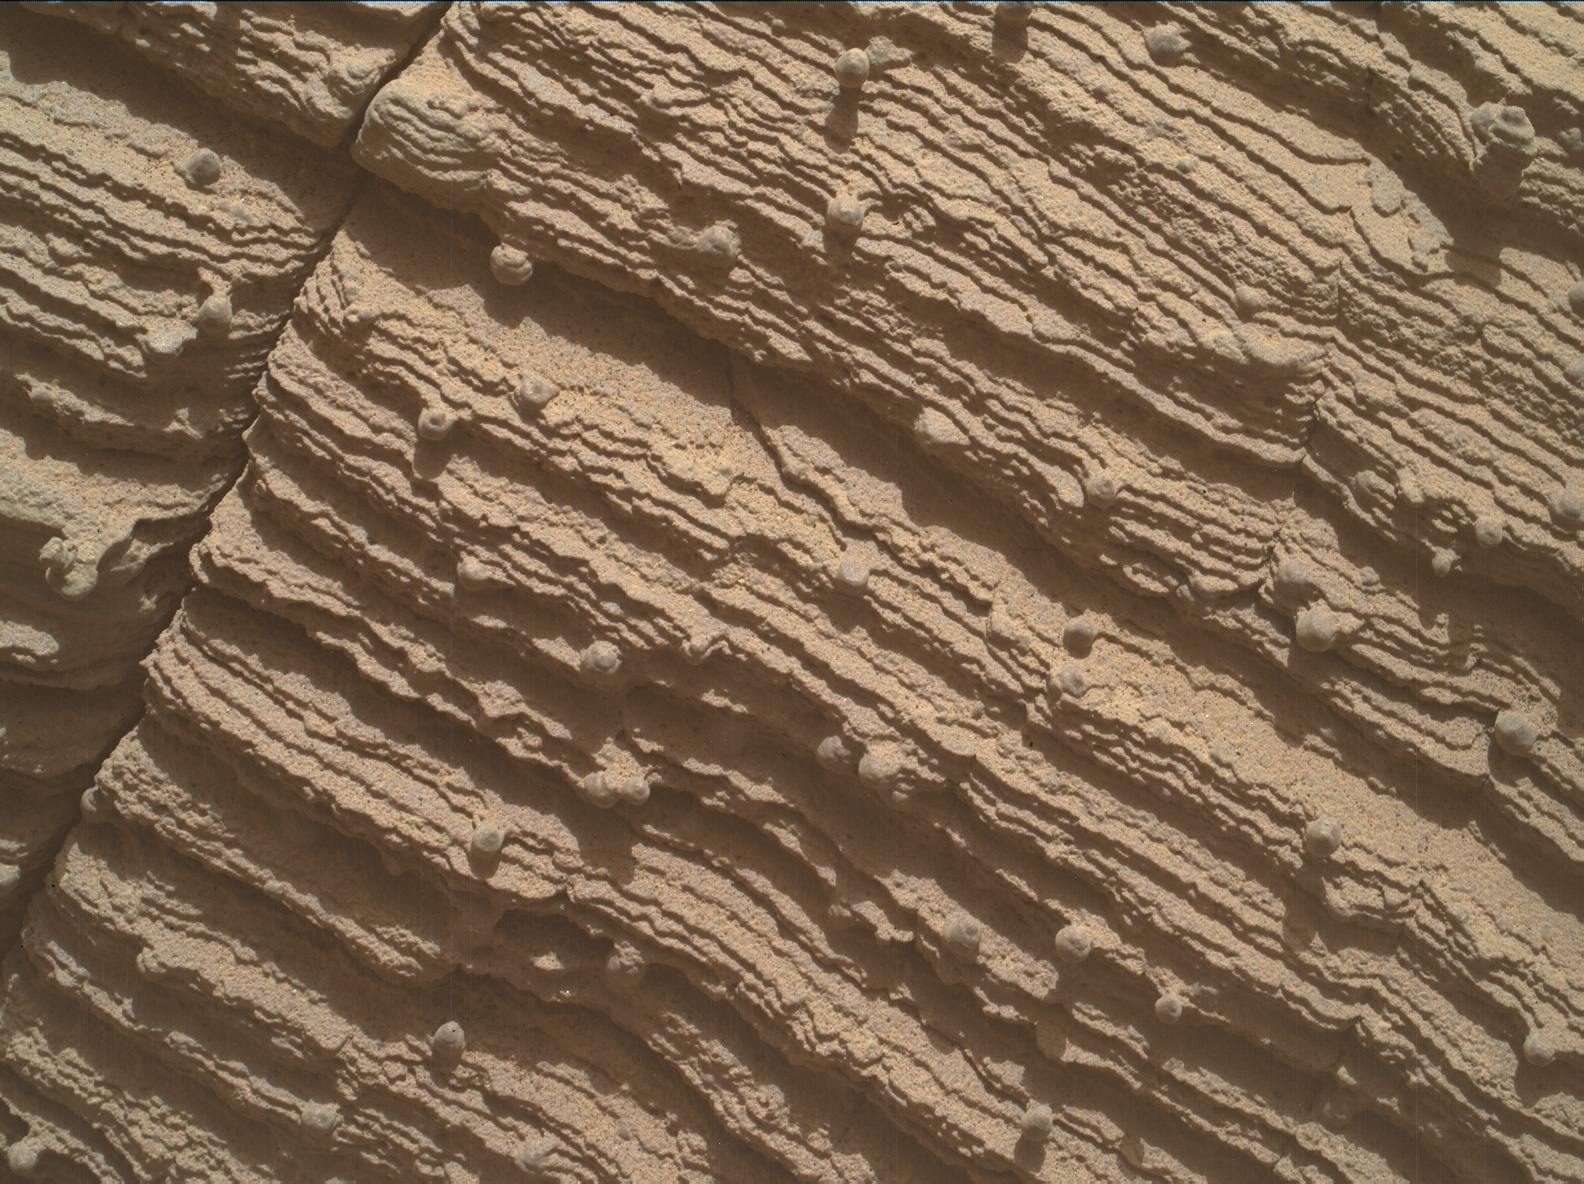 Nasa's Mars rover Curiosity acquired this image using its Mars Hand Lens Imager (MAHLI) on Sol 3605